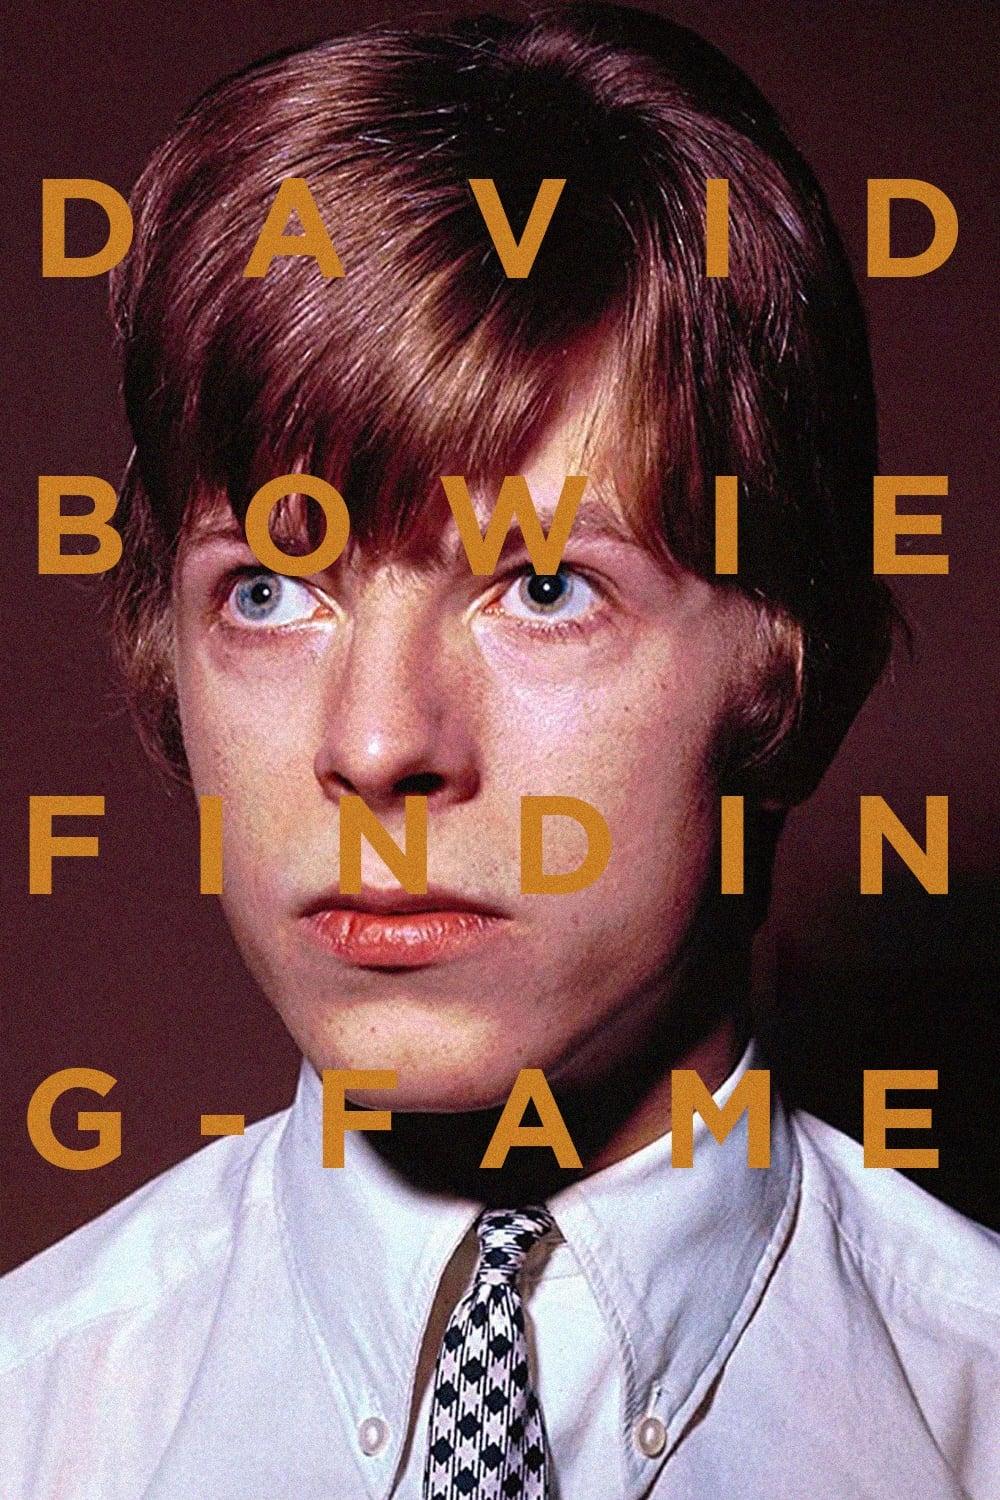 David Bowie: Finding Fame poster